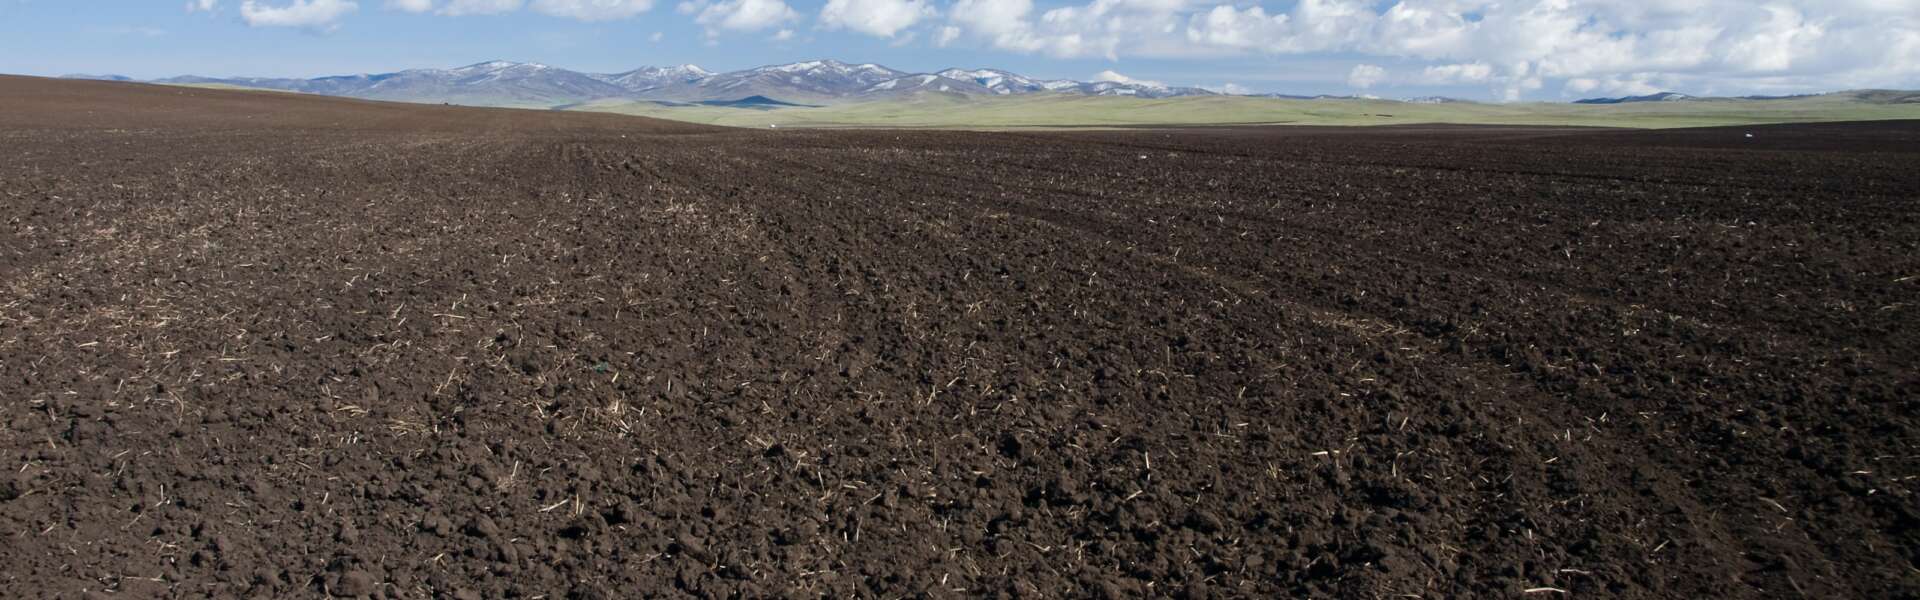 A tilled field with mountains in the distance and a cloudy blue sky.